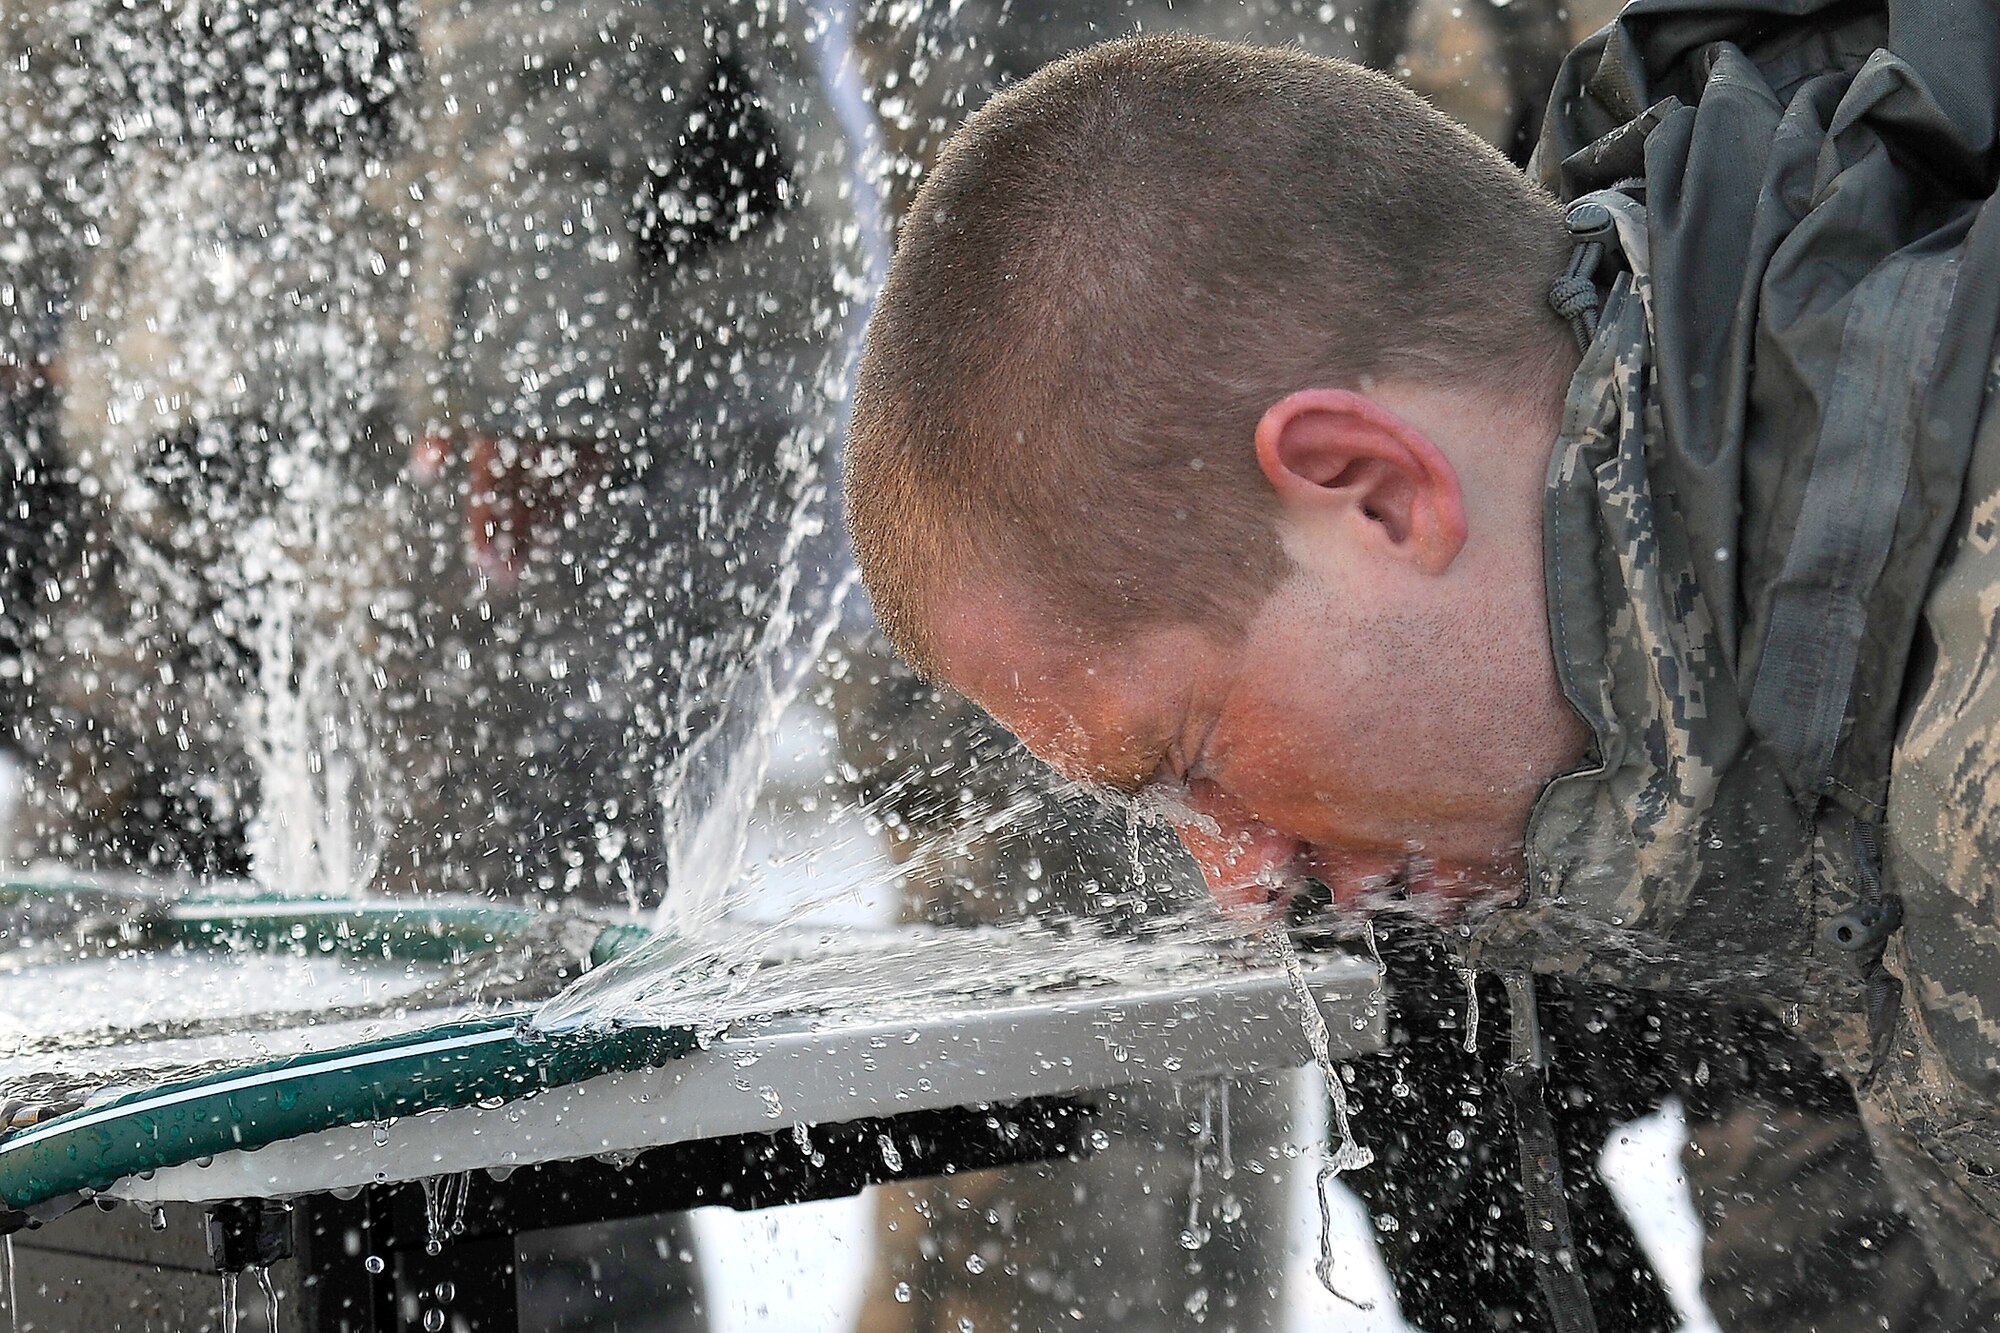 Airman 1st Class Thomas Hearton washes off Oleoresin Capsicum spray from his face Jan. 5, 2011, at Hill Air Force Base, Utah. OC spray is a non-lethal spray, similar to pepper spray, used to temporarily incapacitate individuals. All security forces Airmen receive the OC training when they first arrive at their squadron. Airman Hearton is assigned to the 75th Security Forces Squadron. (U.S. Air Force photo/Staff Sgt. Tim Chacon)